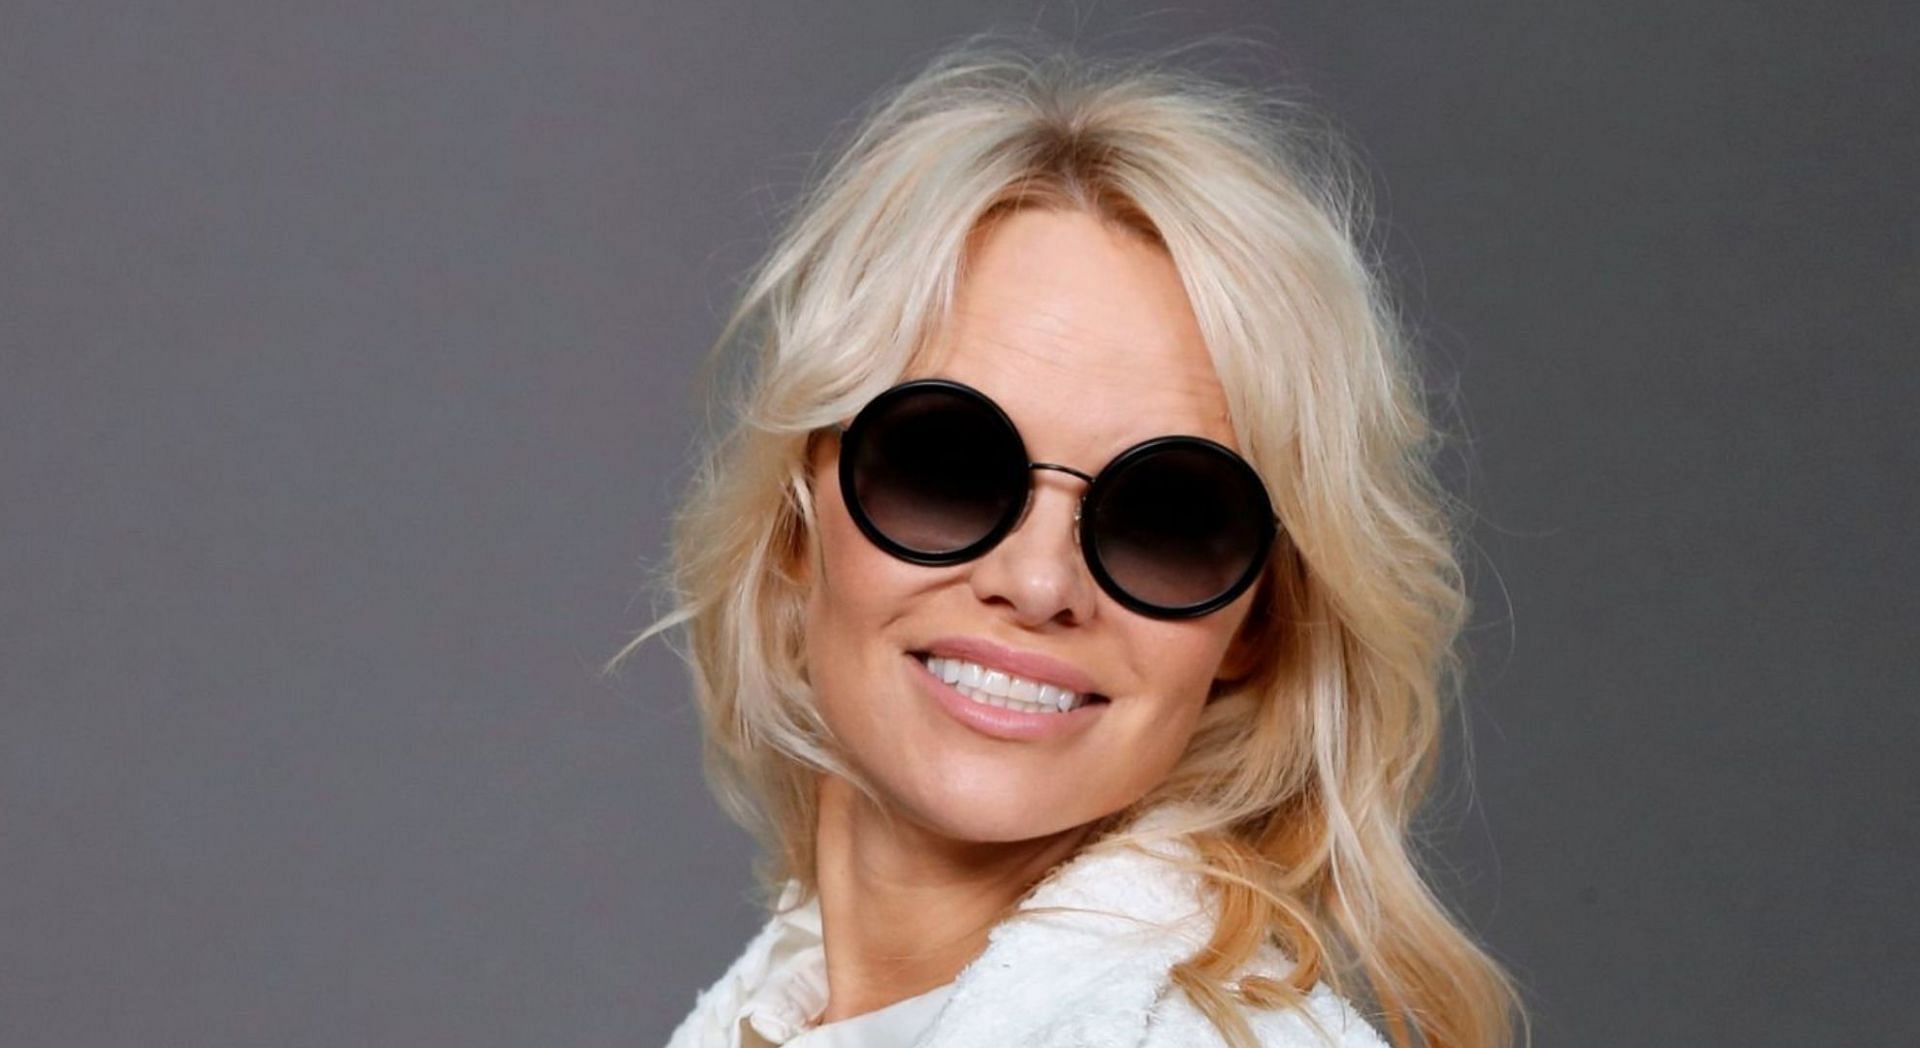 Pamela Anderson opened up about her relationships in her Netflix documentary (Image via Getty Images)